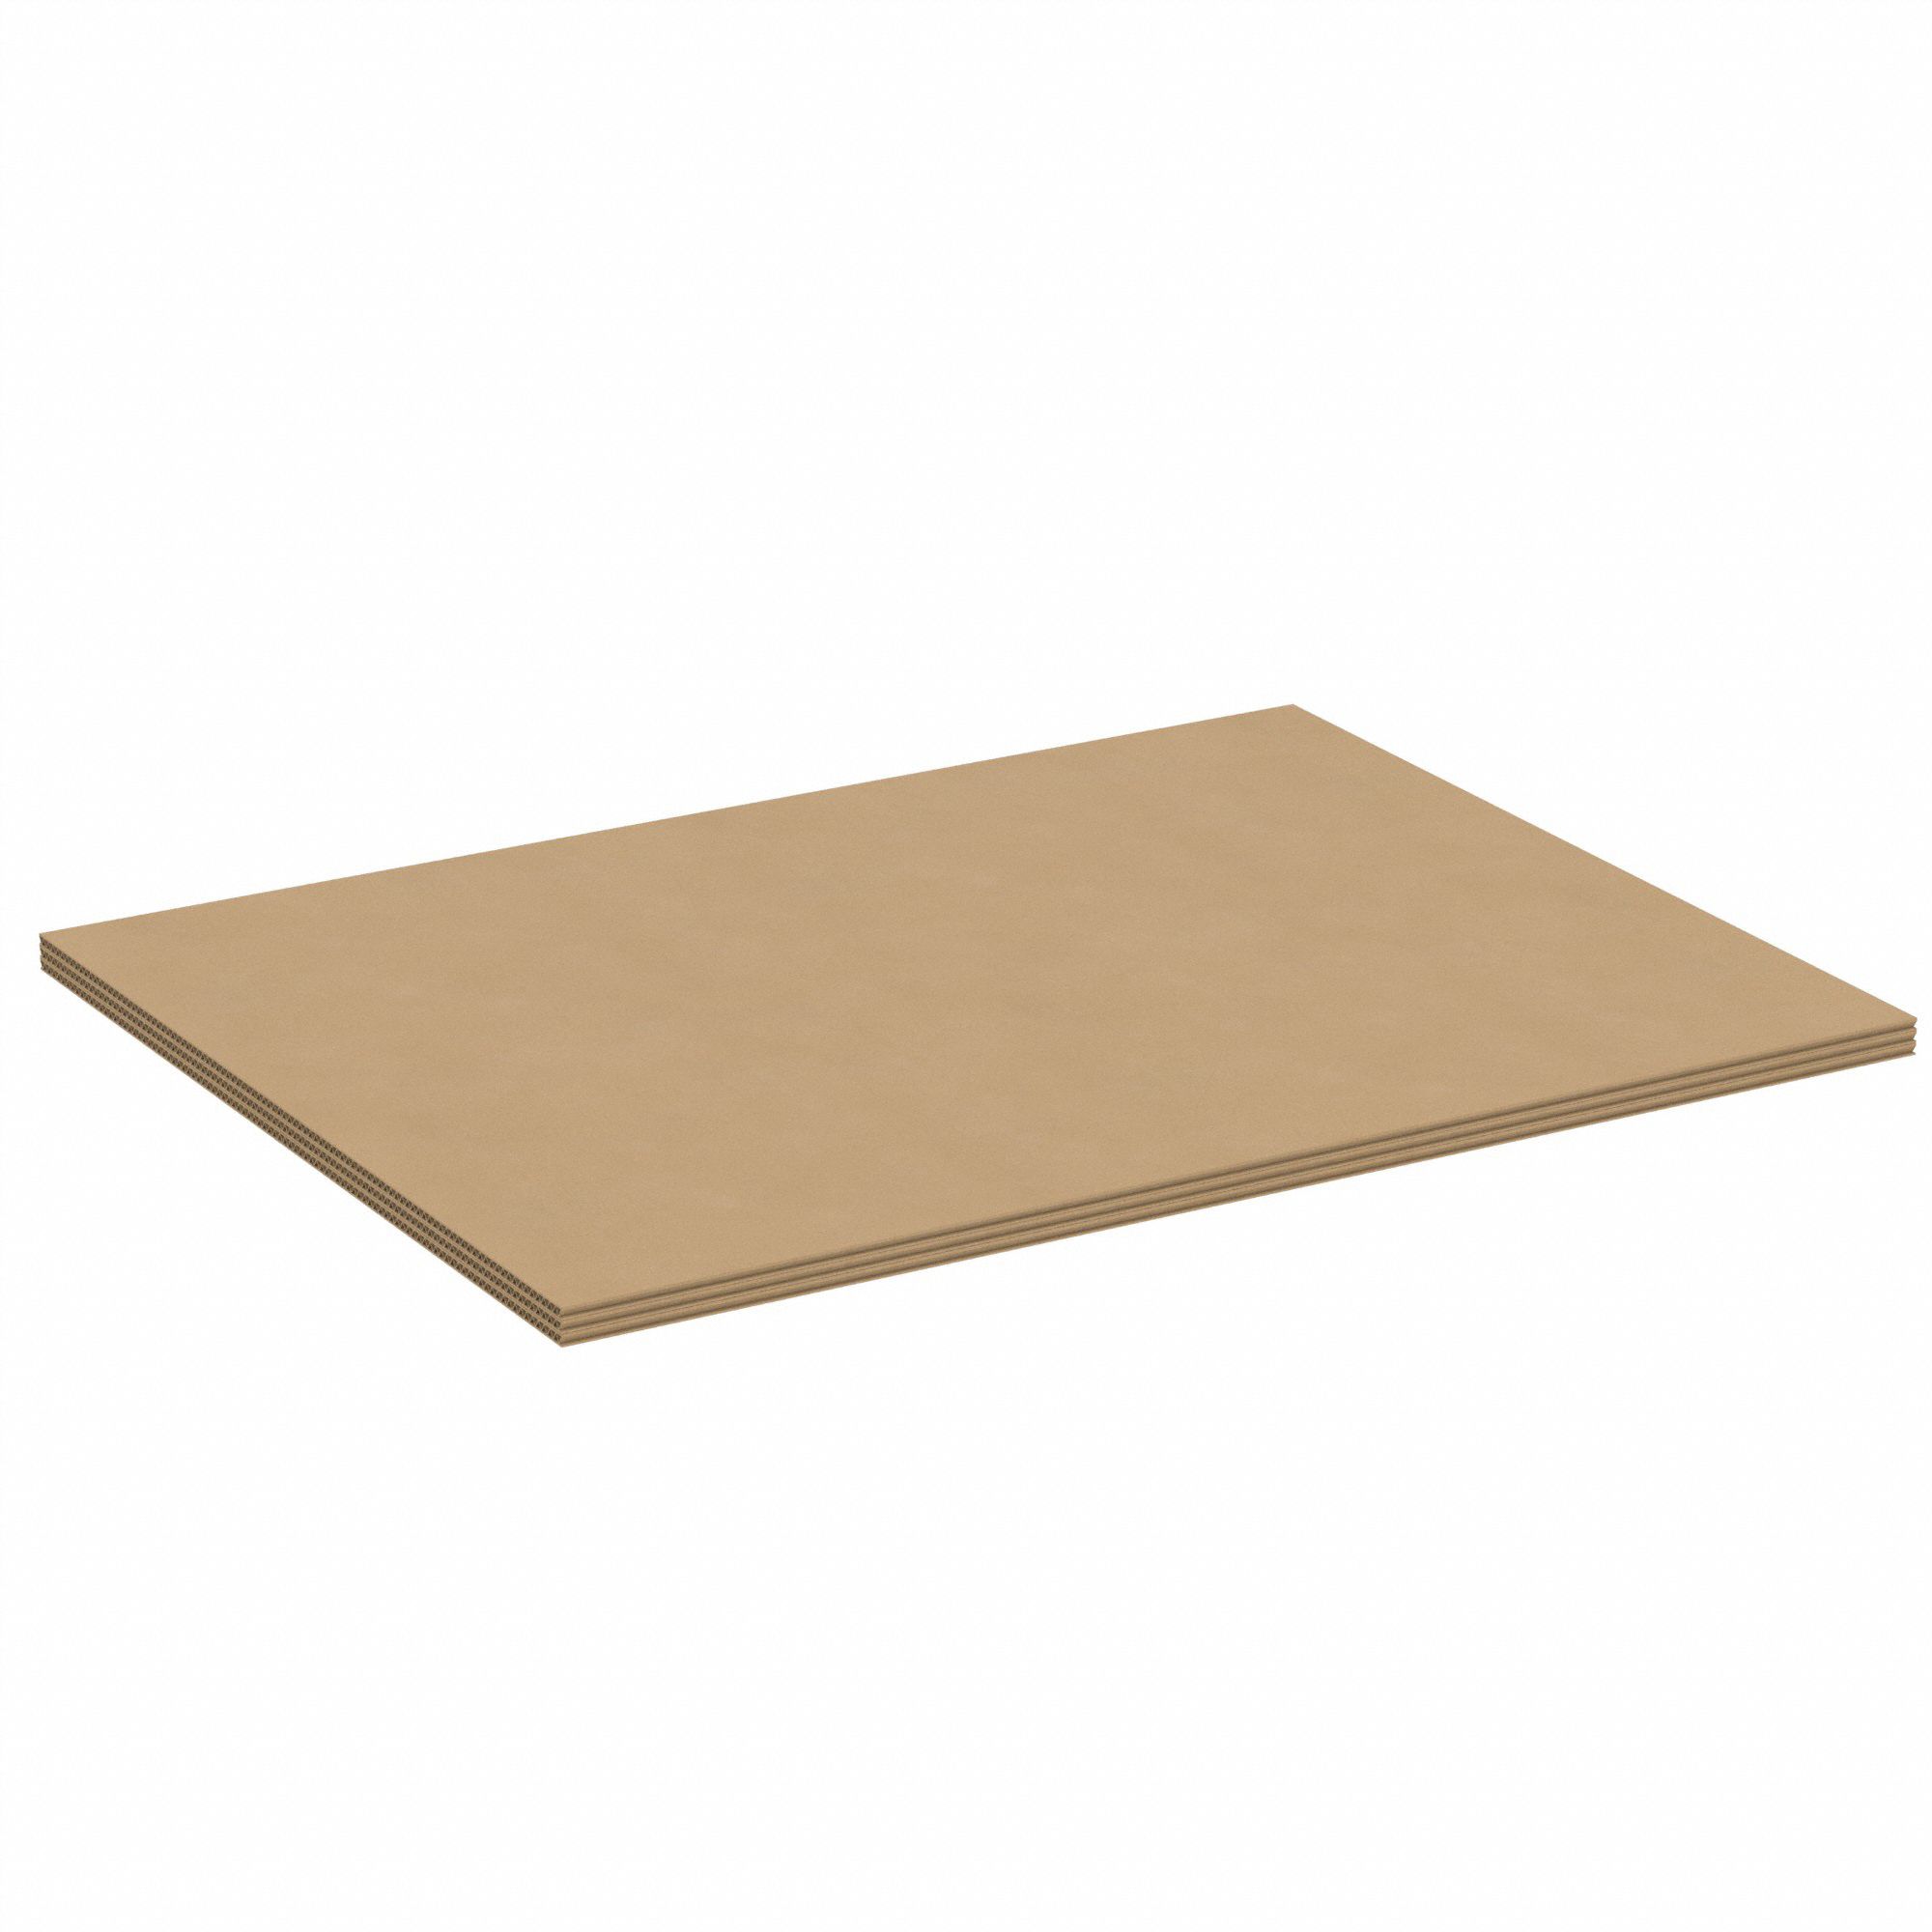 12 x 12 Corrugated Pad Sold in stacks of 100 – 3D Corrugated - Packing  Boxes, Corrugated Boxes and Shipping Supplies